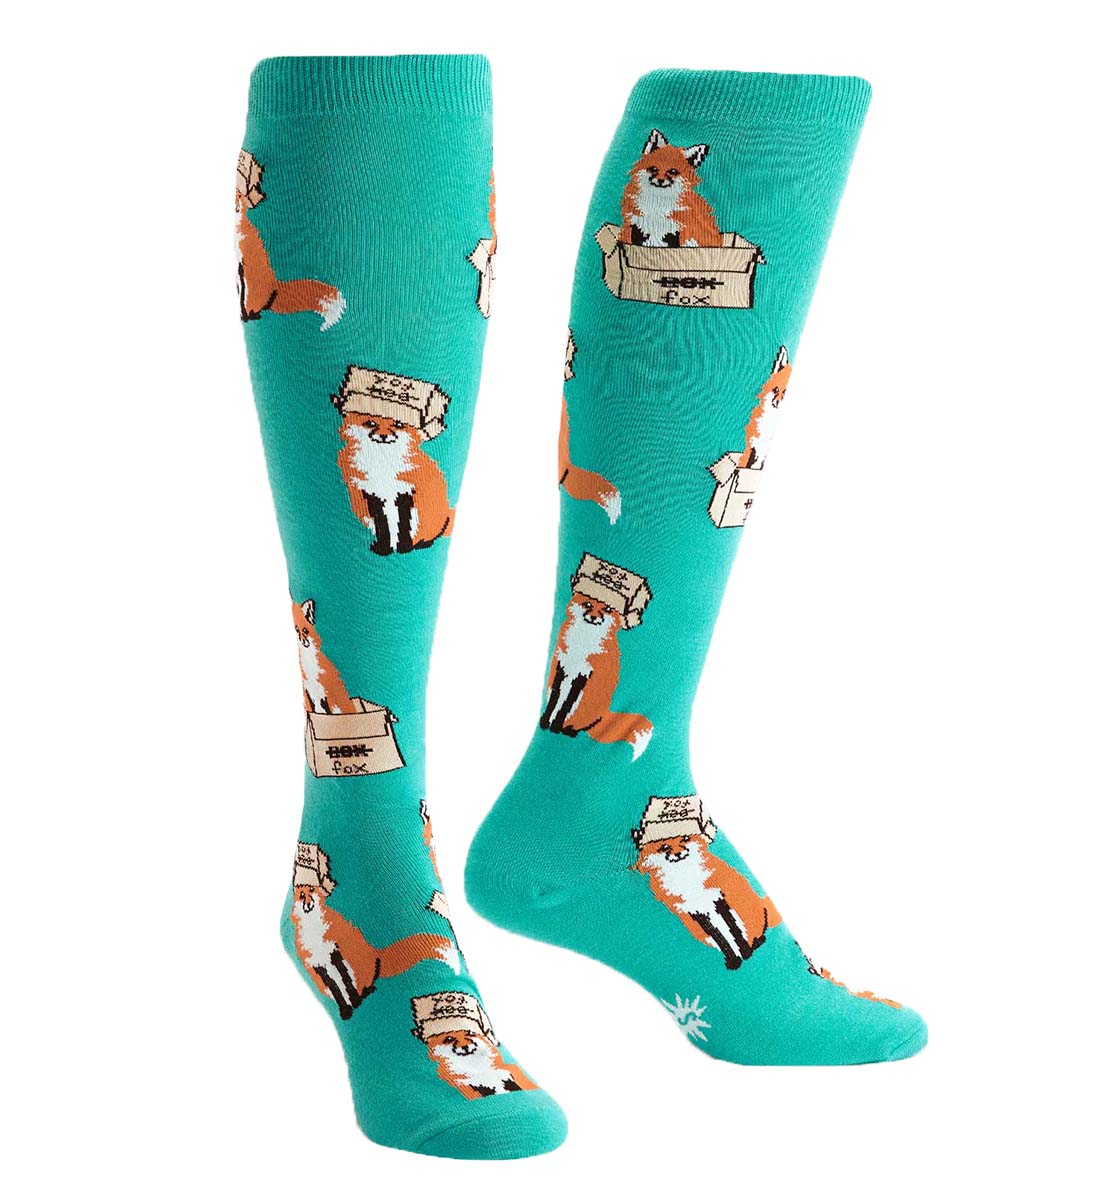 SOCK it to me Unisex Knee High Socks (f0401), Foxes in Boxes - Foxes in Boxes,One Size